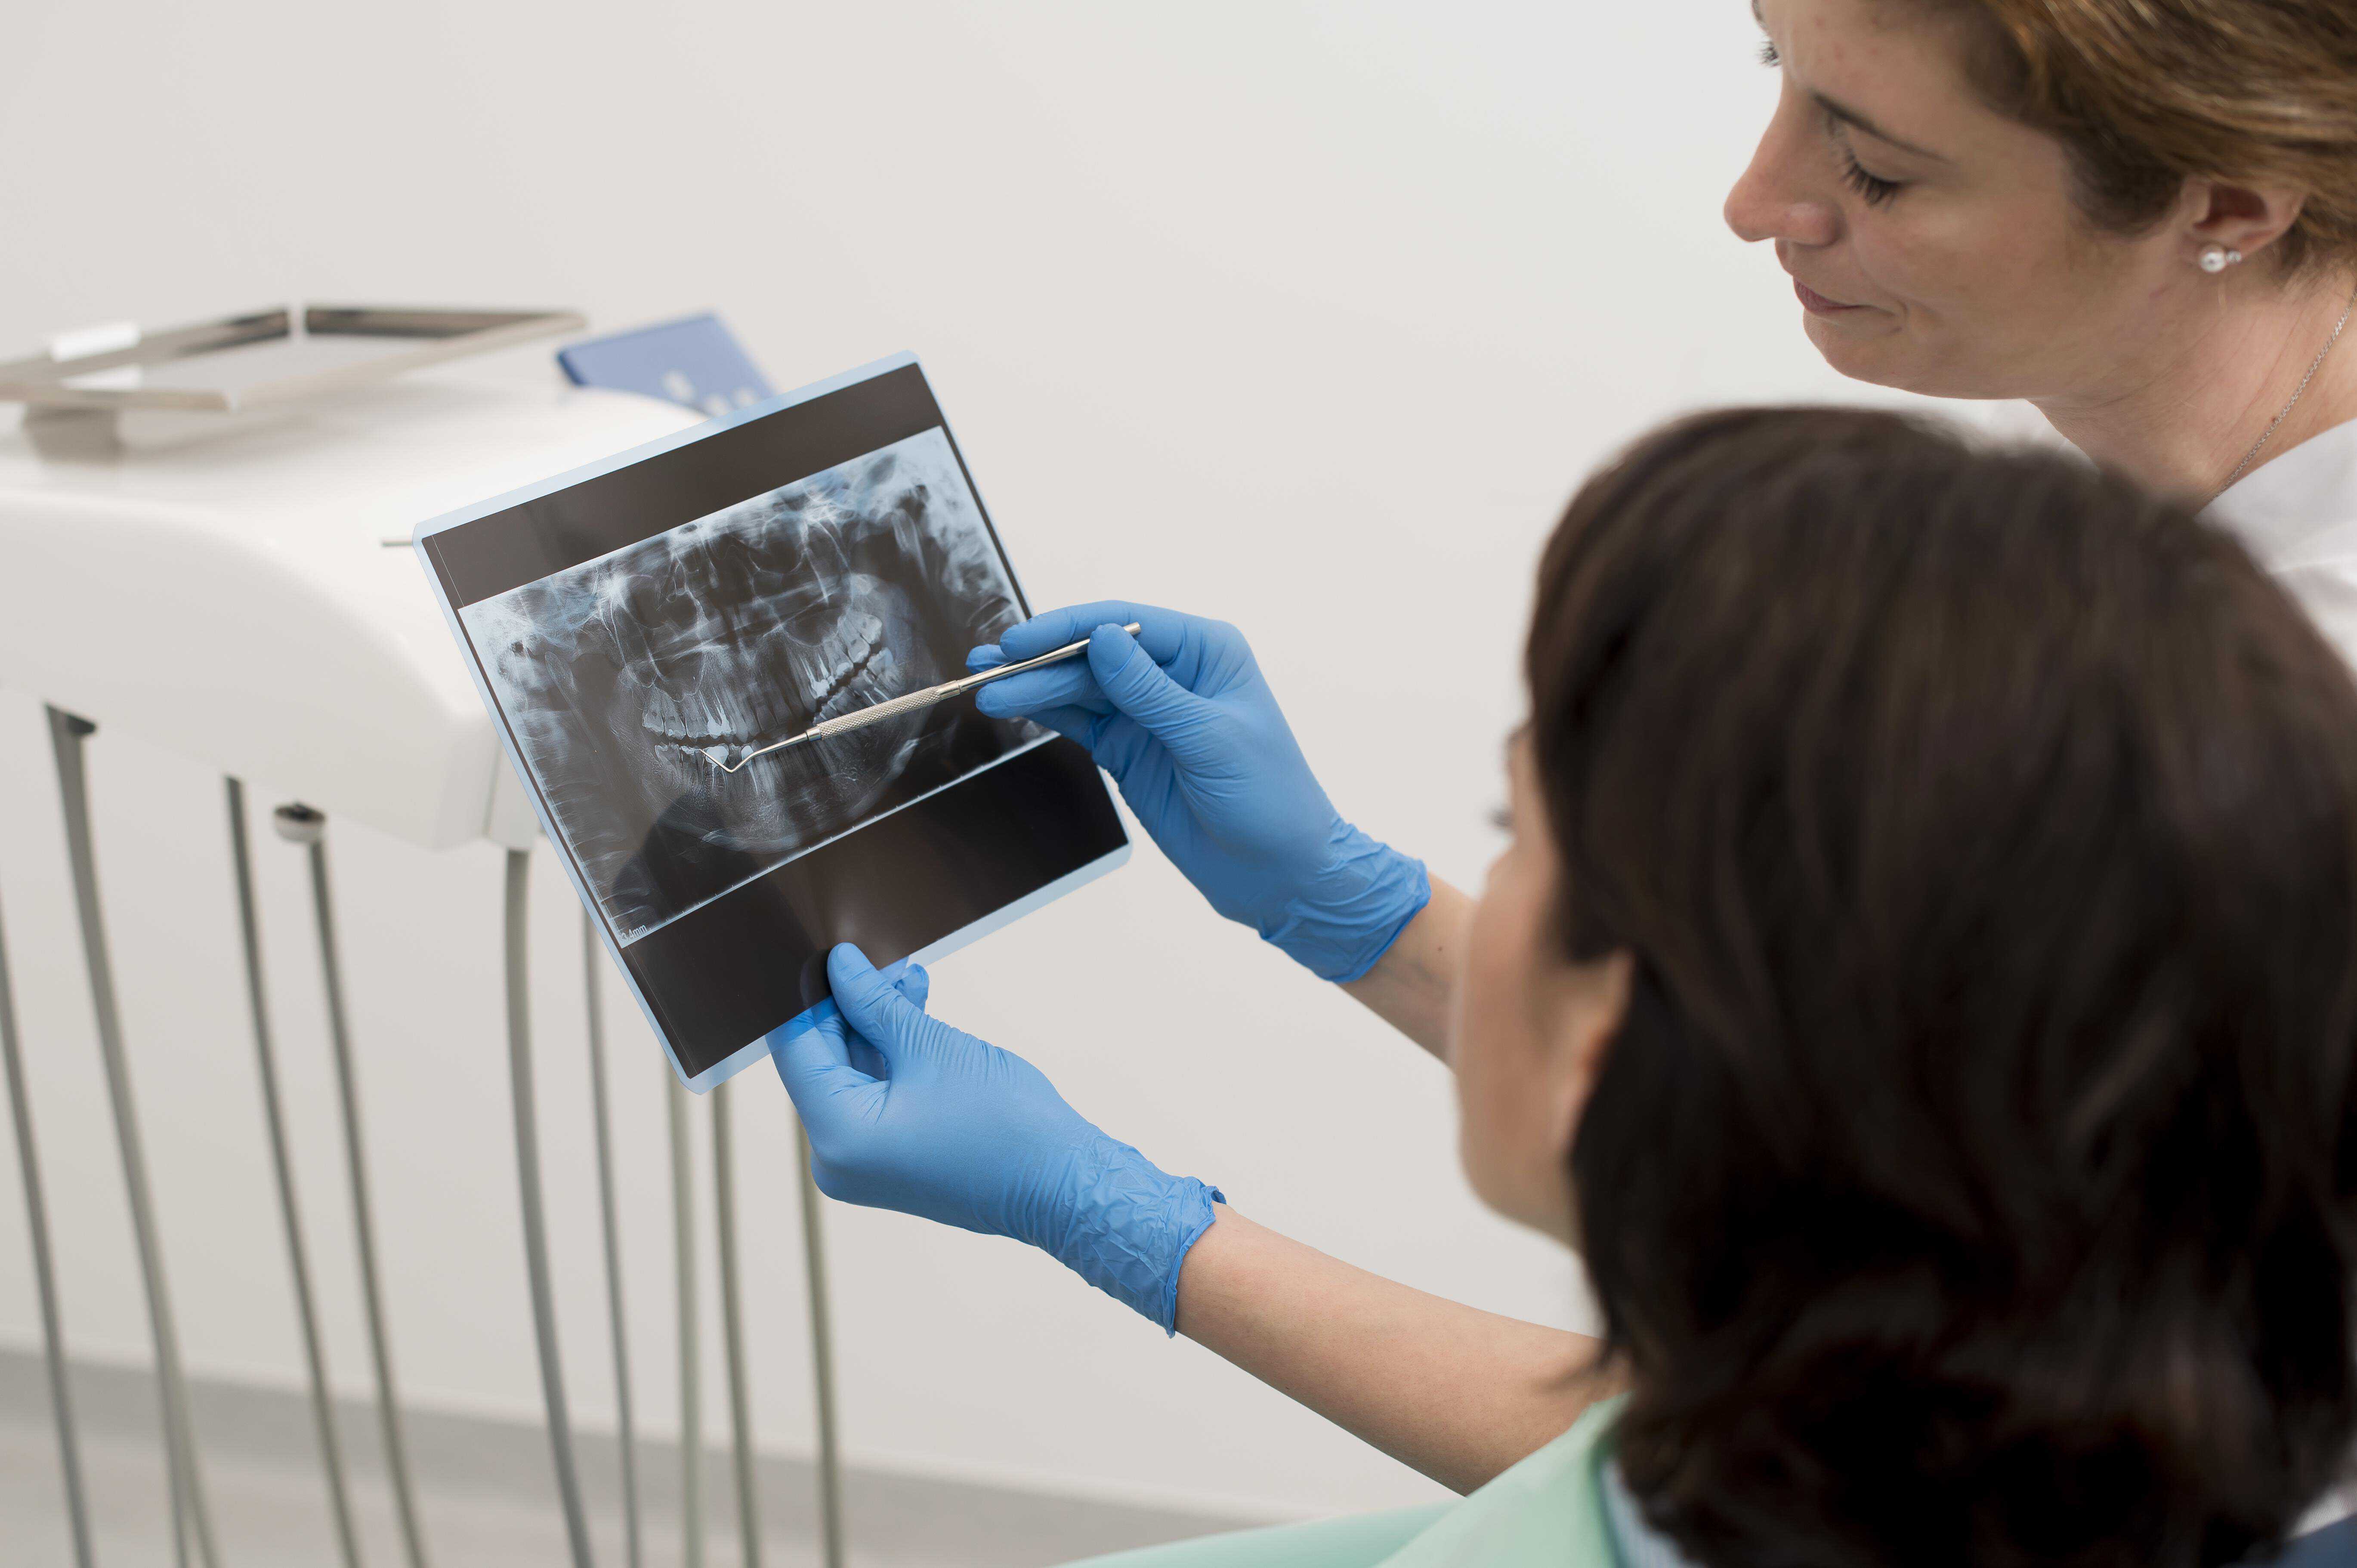 The dentist is providing information to the patient about dental imaging.